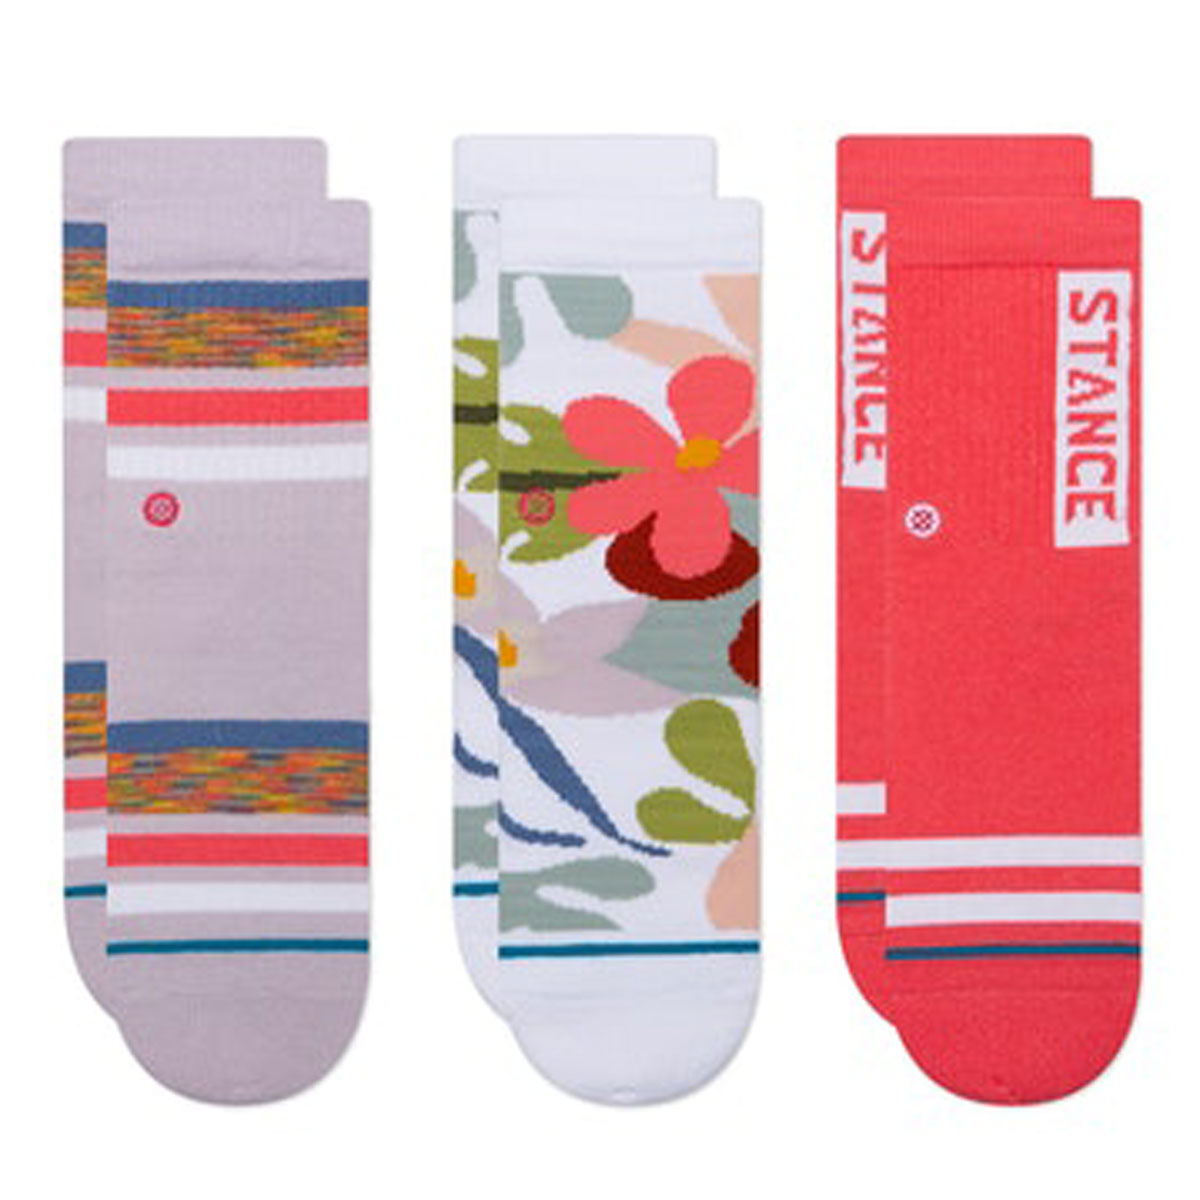 Stance Youth Always Sunny Socks - Pink image 1